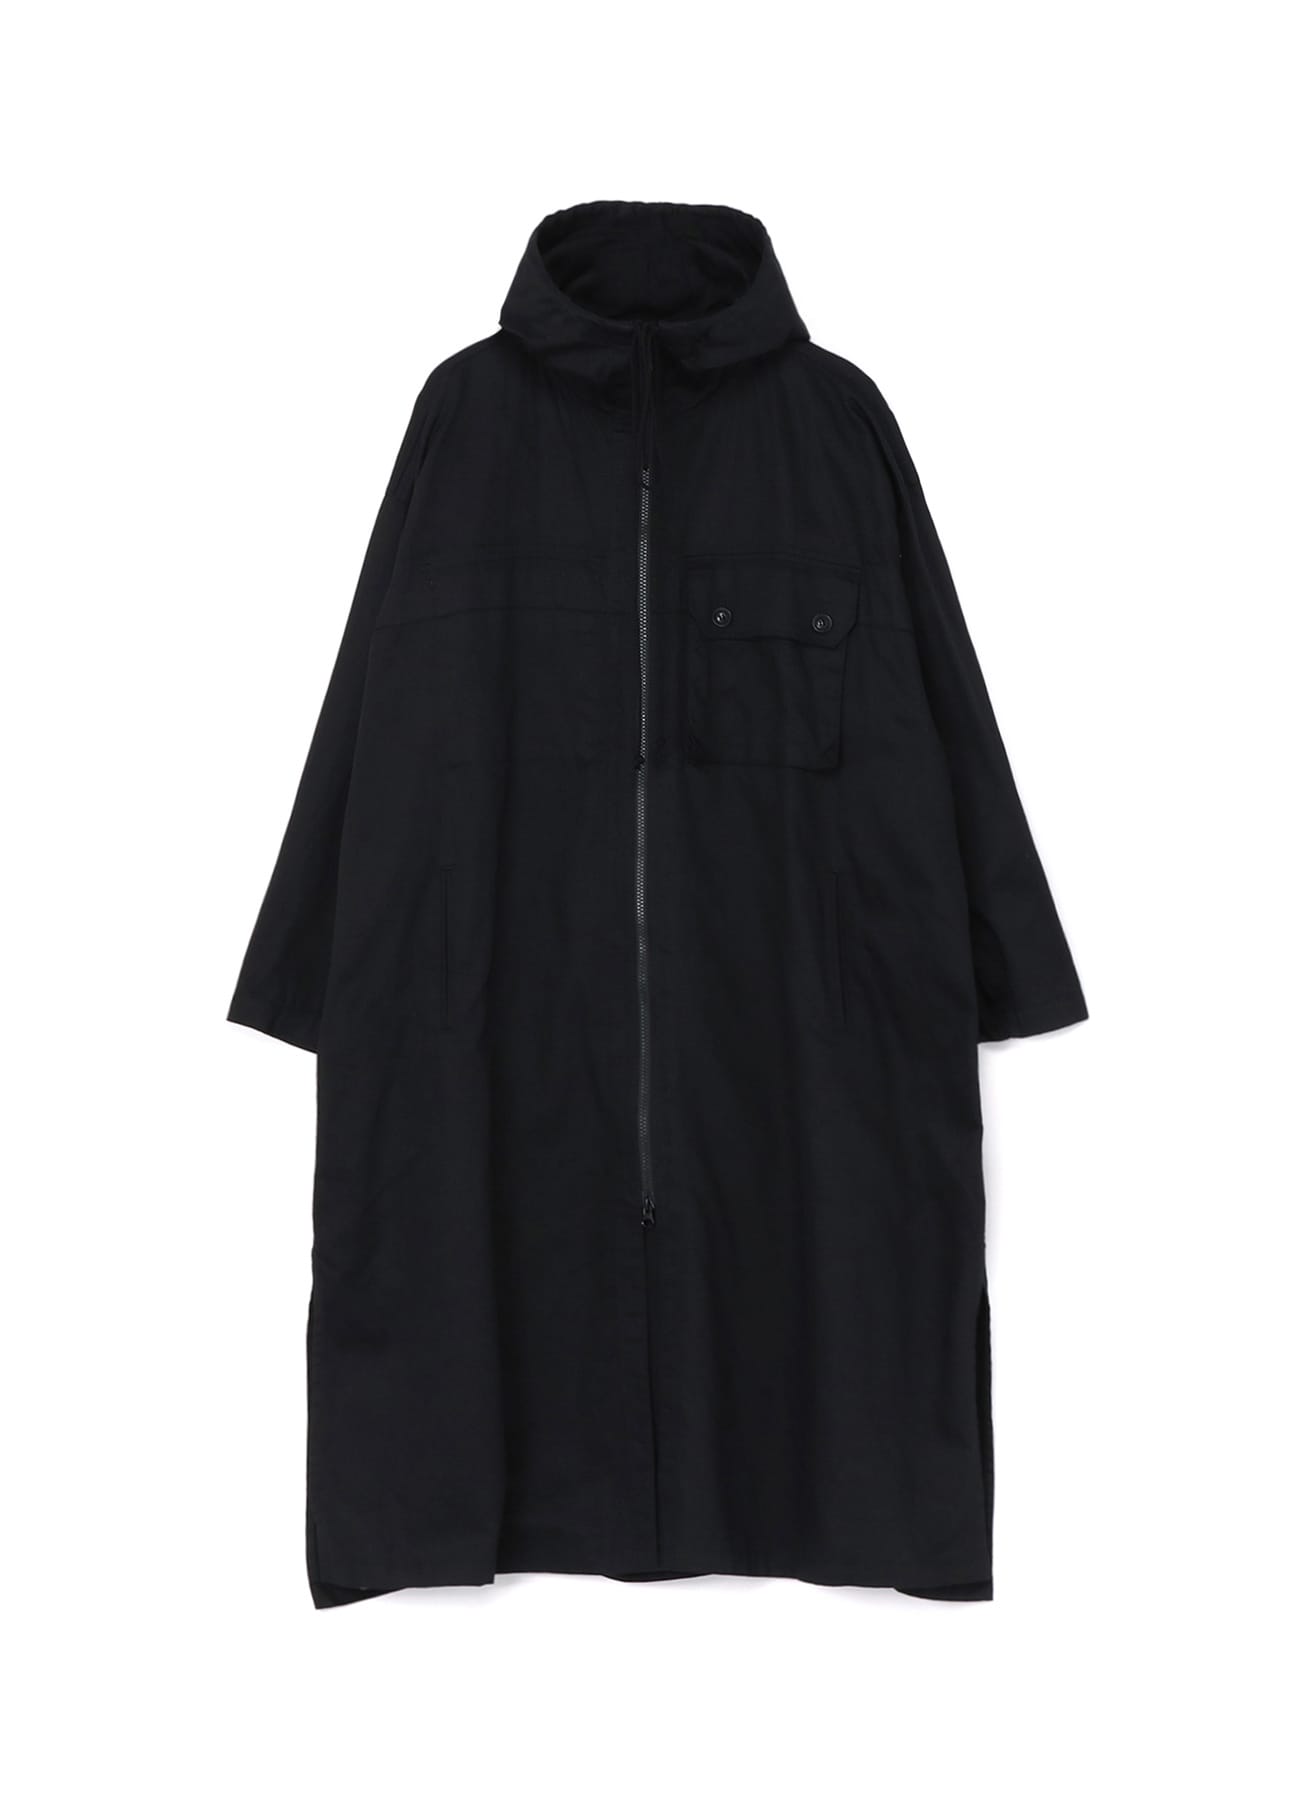 Y's BORN PRODUCT] COTTON TWILL HOODED COAT(XS Black): Y's｜THE 